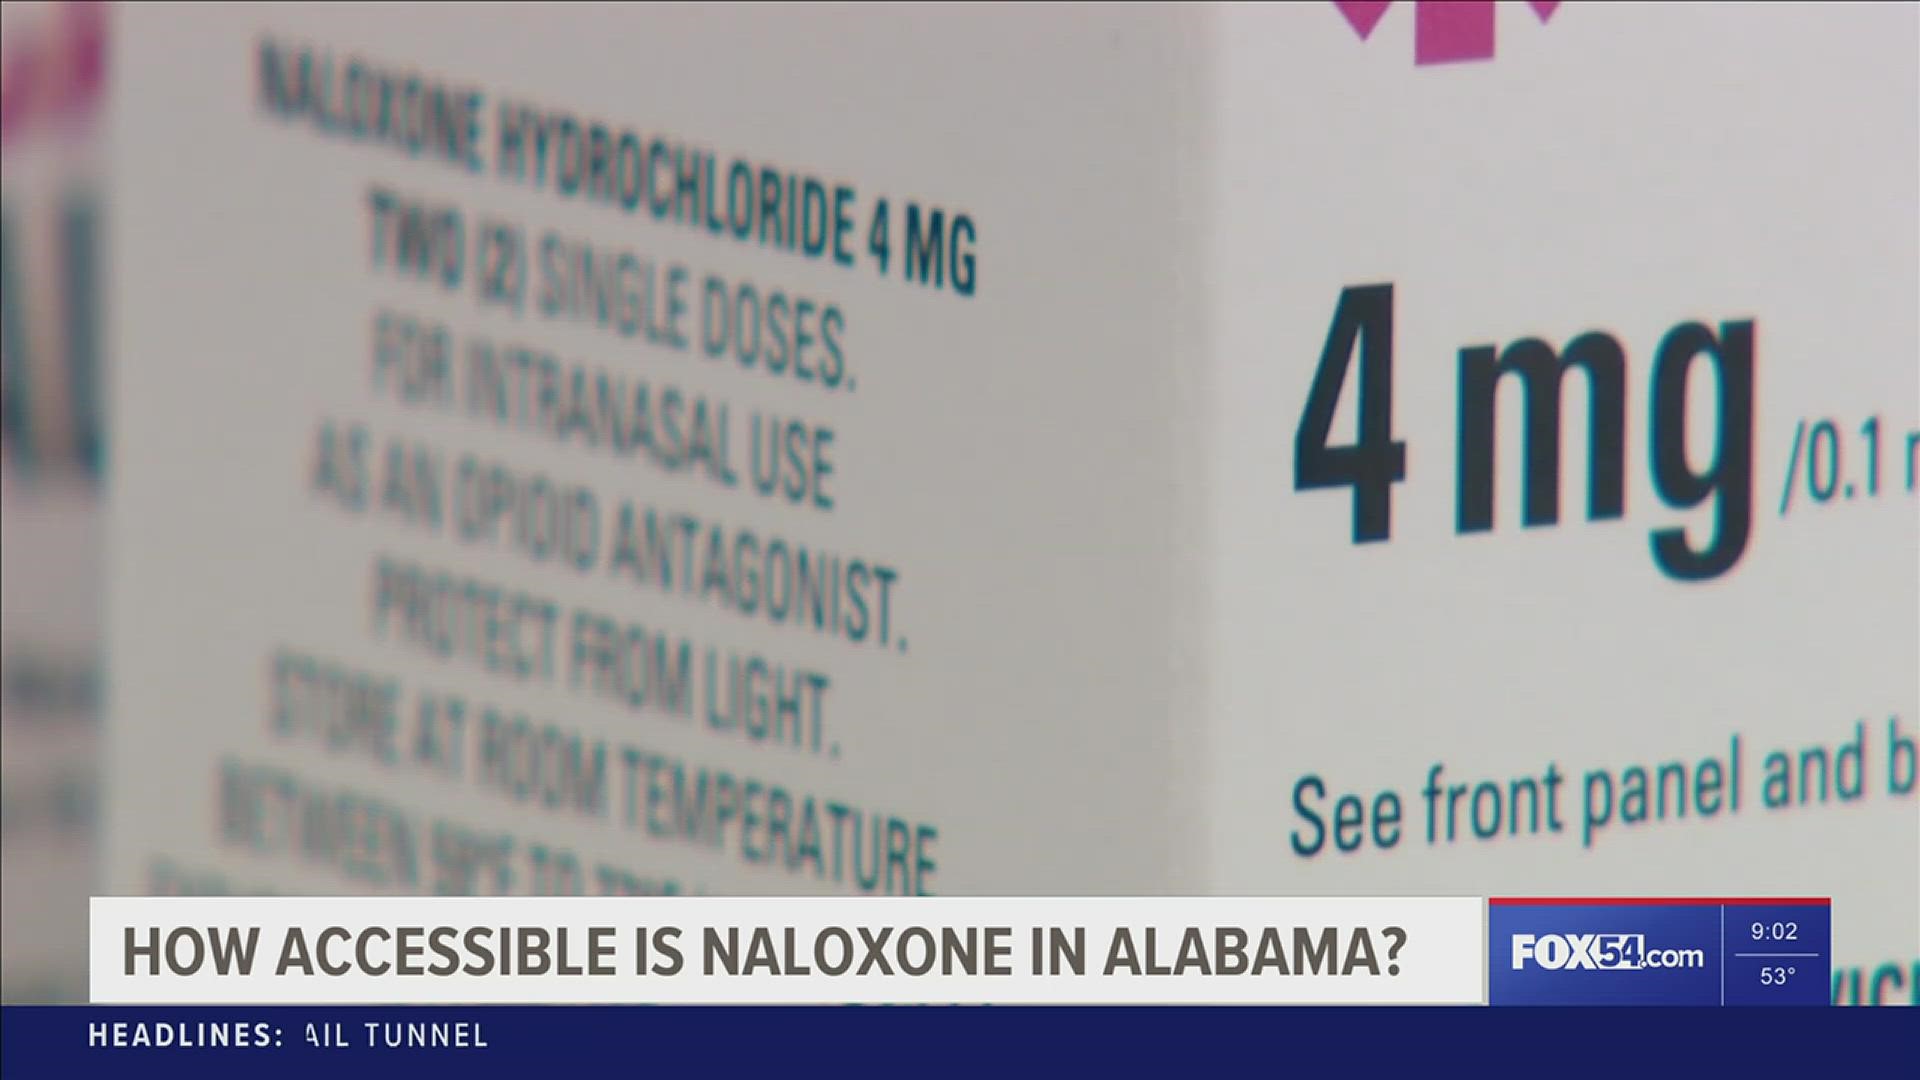 Even a small amount of fentanyl can take someone's life. Our Nixon Norman shares what kind of access Alabama has to life-saving drugs.